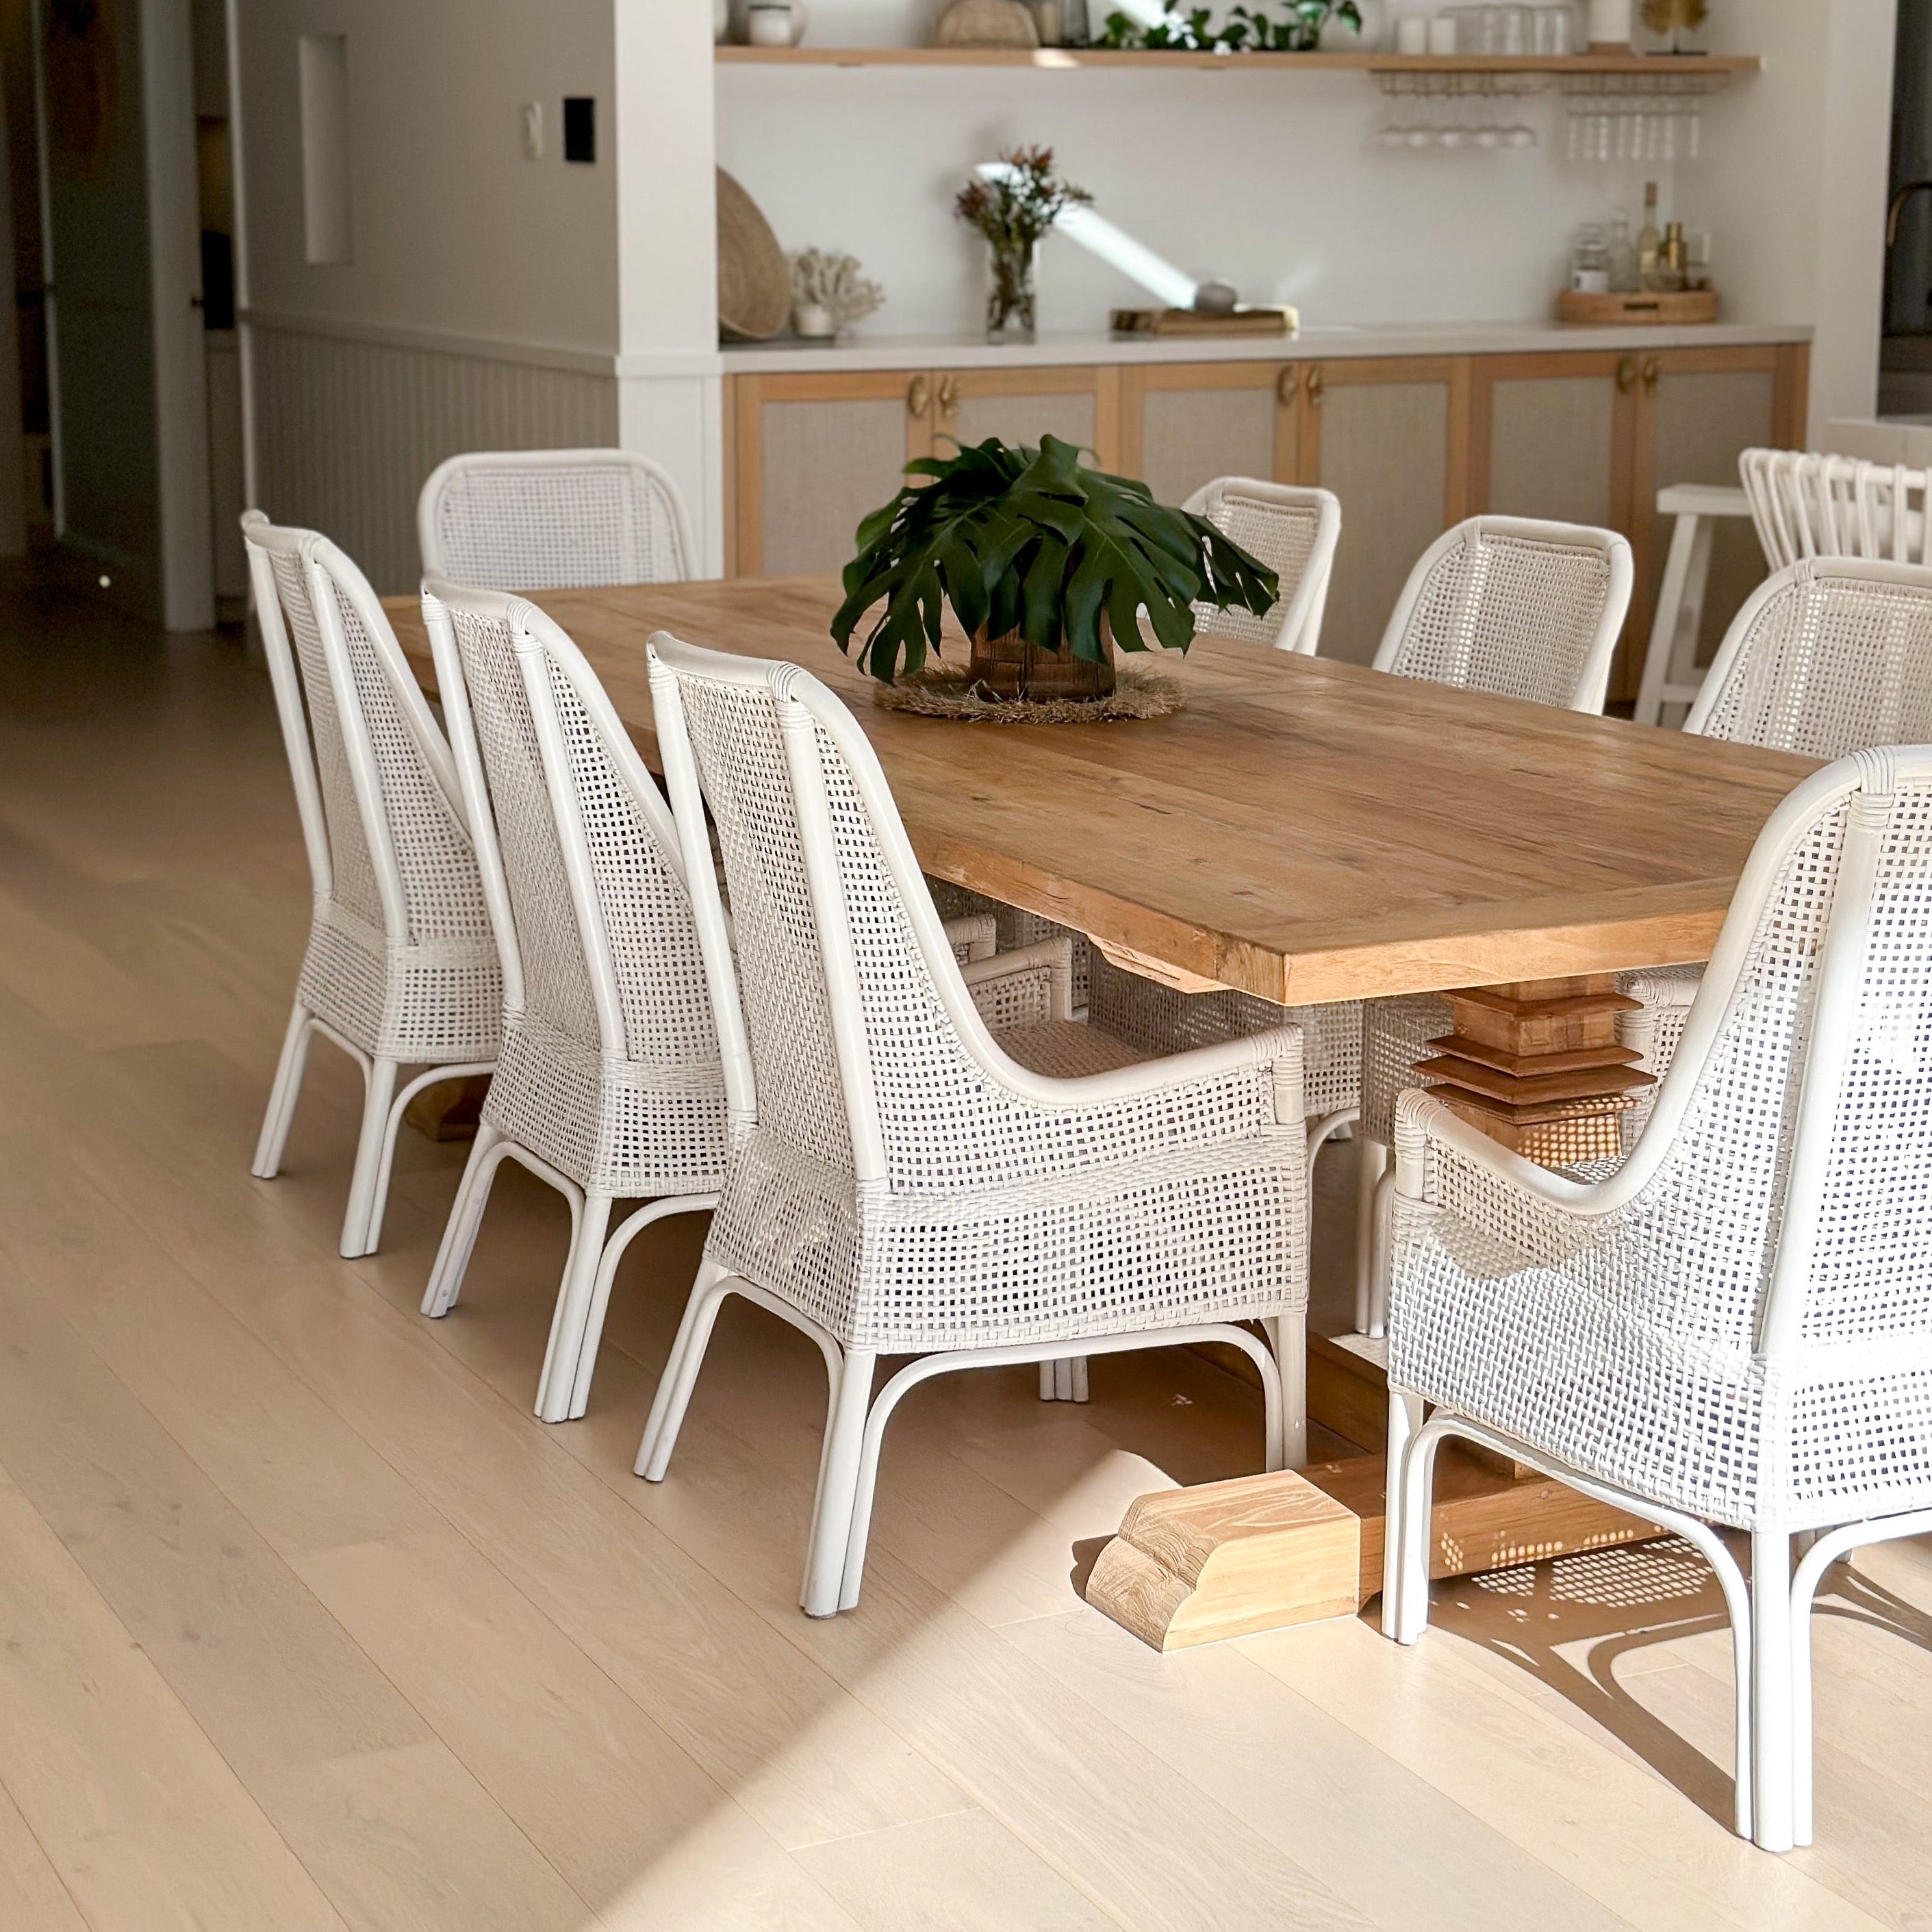 Mulhouse Rectangle Dining Table | 3 Sizes